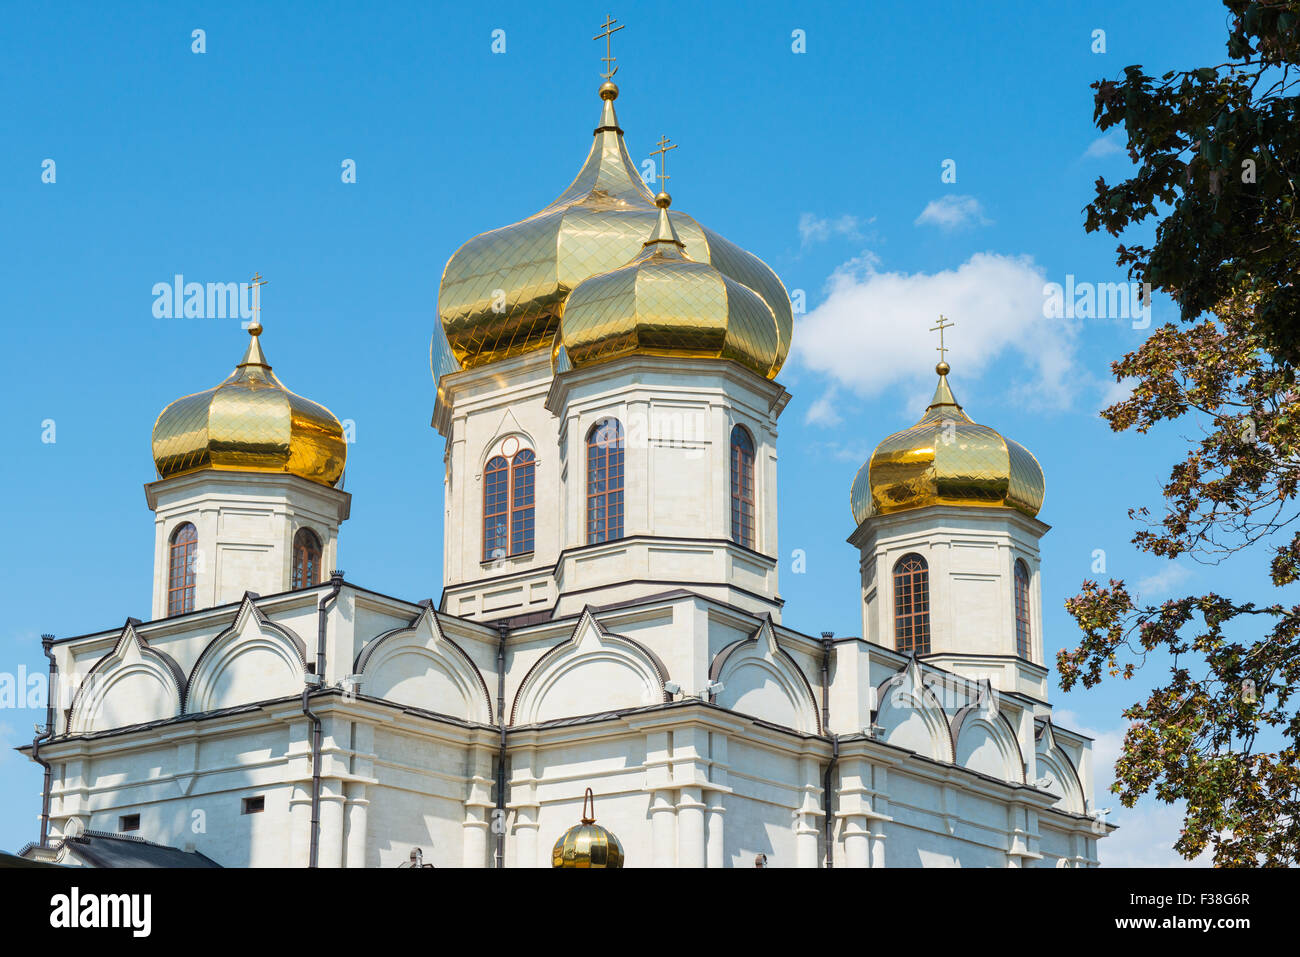 Fragment with the domes of the Orthodox Church, Stavropol. Russia Stock Photo